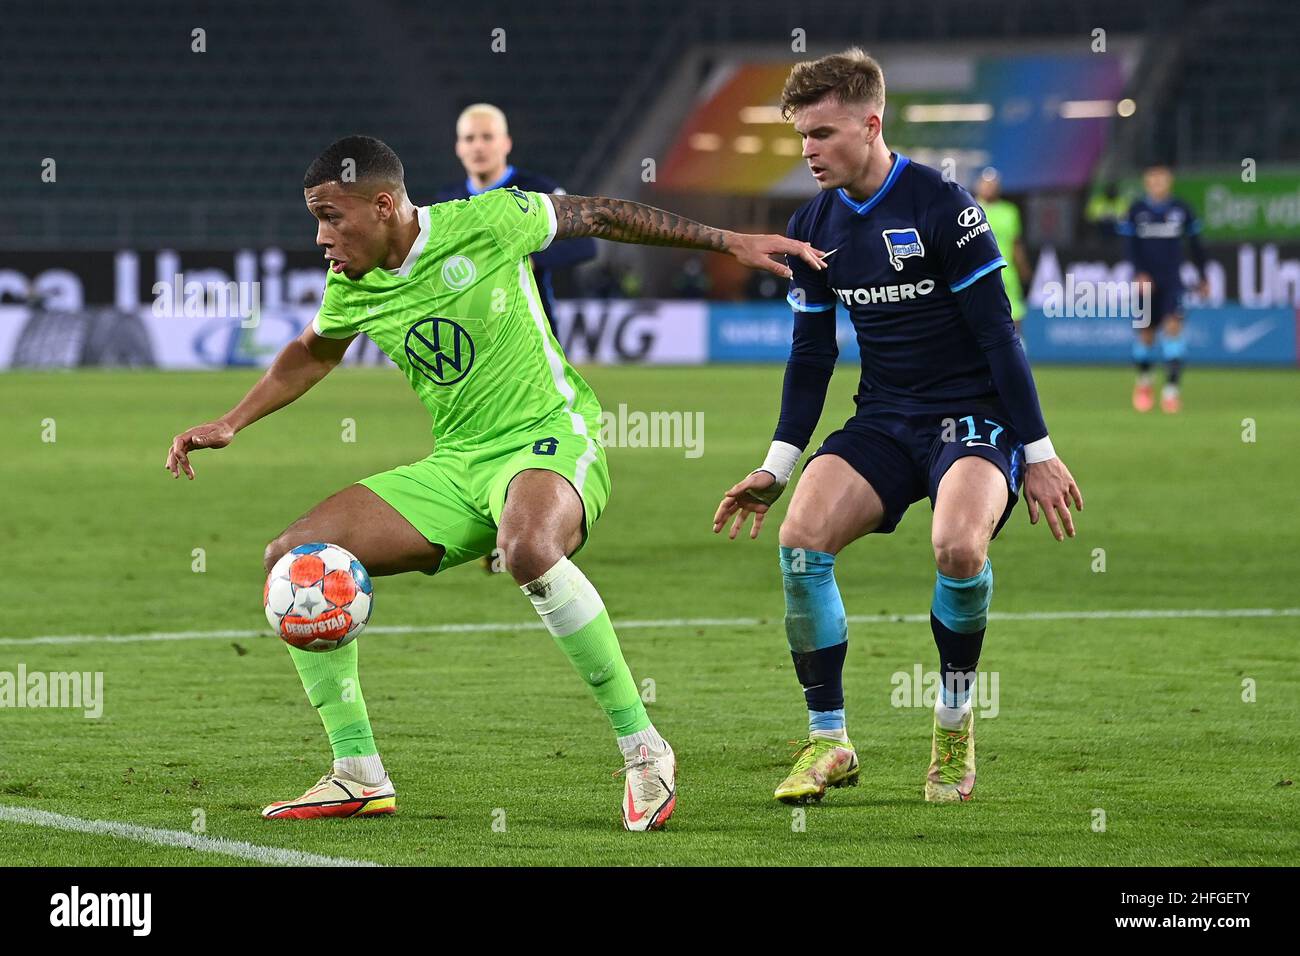 Wolfsburg, Germany. 15th Jan, 2022. Soccer: Bundesliga, VfL Wolfsburg - Hertha BSC, Matchday 19 at Volkswagen Arena. Wolfsburg's Aster Vranckx (l) plays against Berlin's Maximilian Mittelstädt. Credit: Swen Pförtner/dpa - IMPORTANT NOTE: In accordance with the requirements of the DFL Deutsche Fußball Liga and the DFB Deutscher Fußball-Bund, it is prohibited to use or have used photographs taken in the stadium and/or of the match in the form of sequence pictures and/or video-like photo series./dpa/Alamy Live News Stock Photo